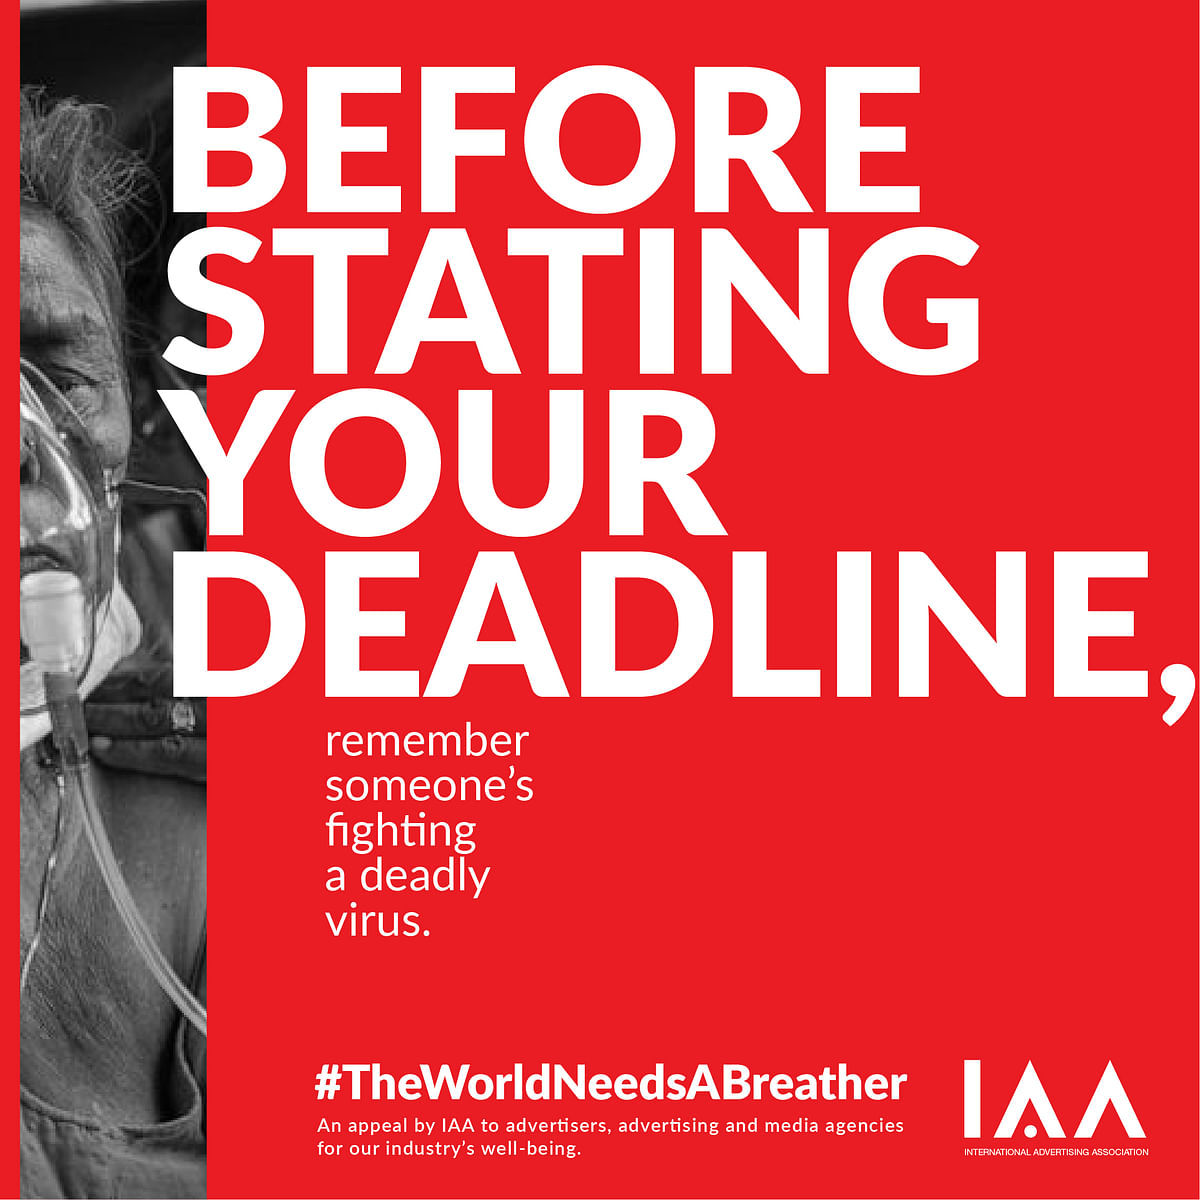 The IAA urges advertisers and agencies to take a breather